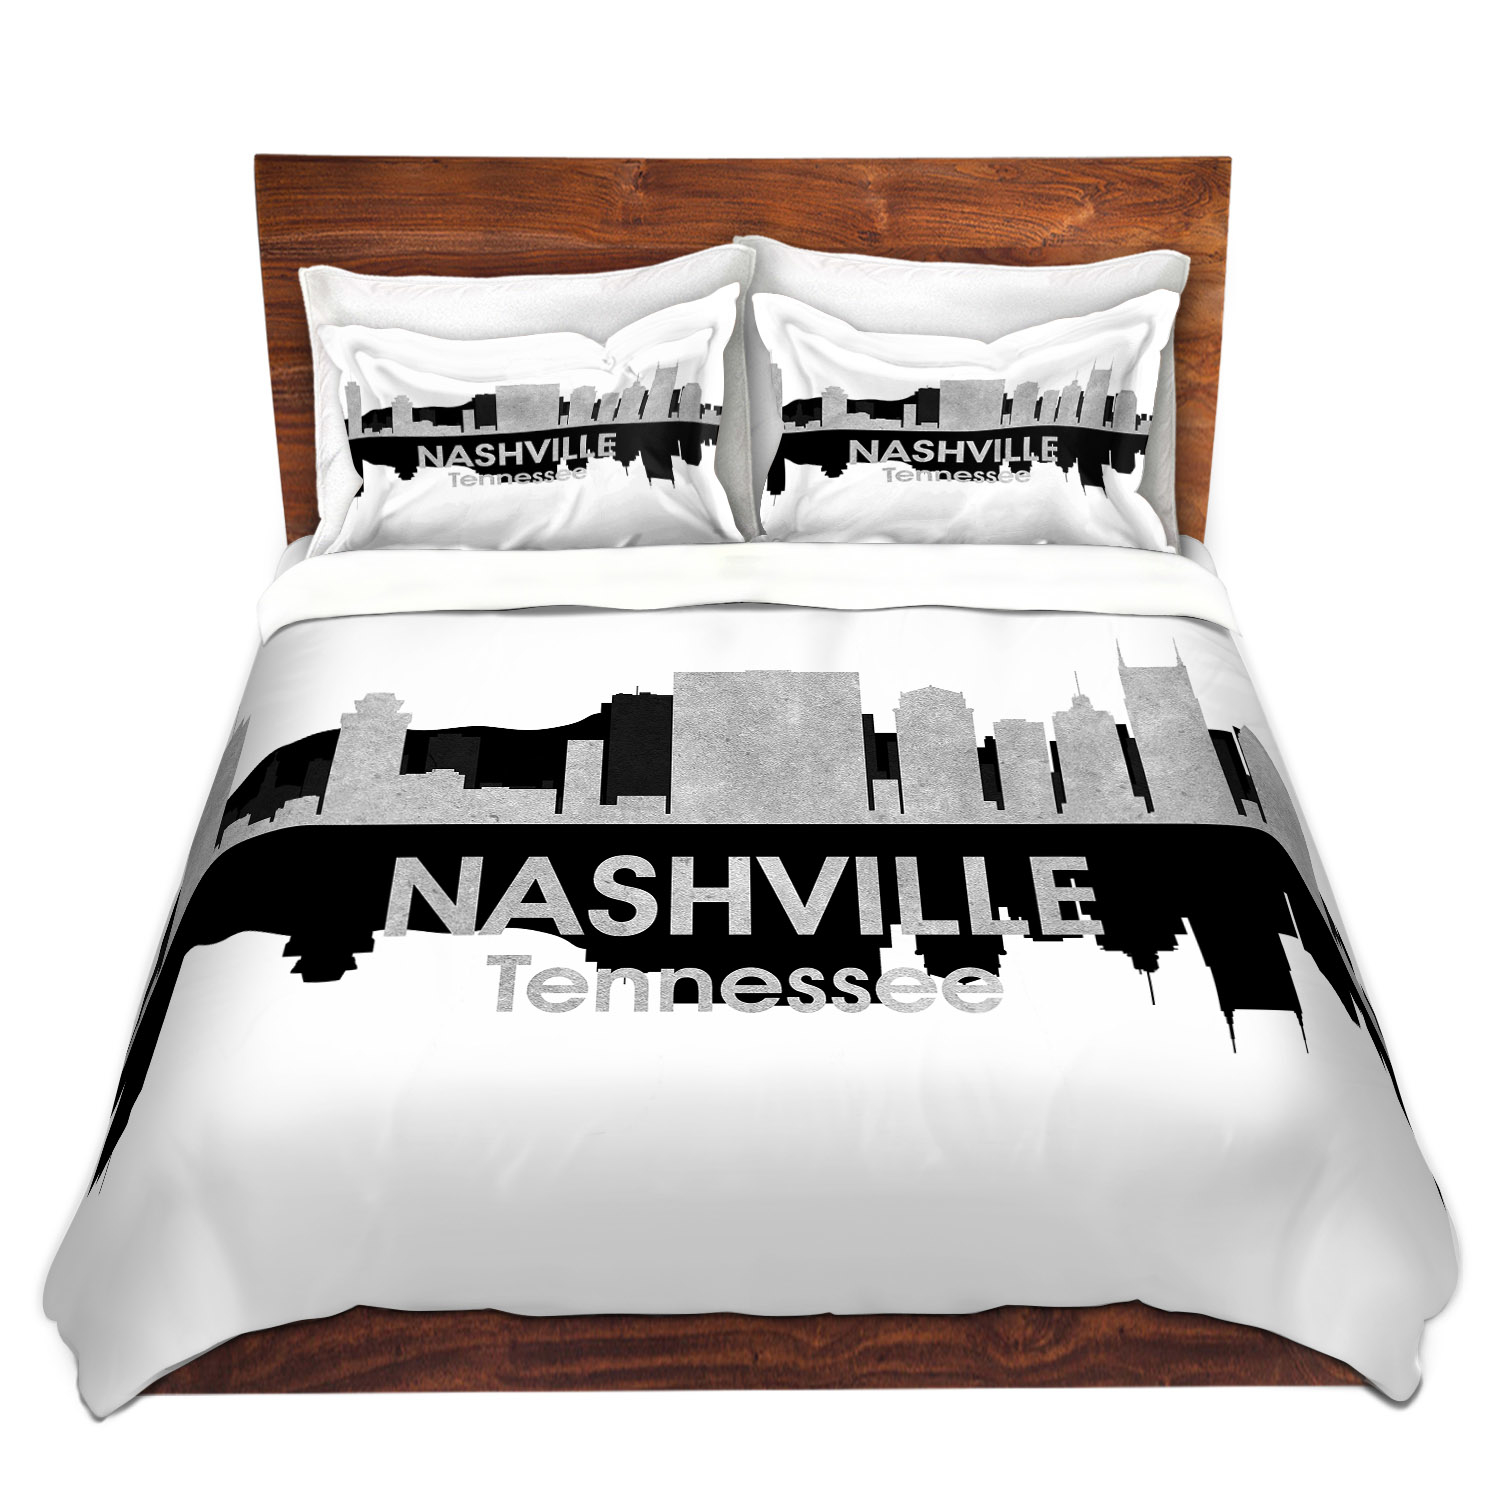 Dianoche Microfiber Duvet Covers By Angelina Vick - City Iv Nashville Tennessee